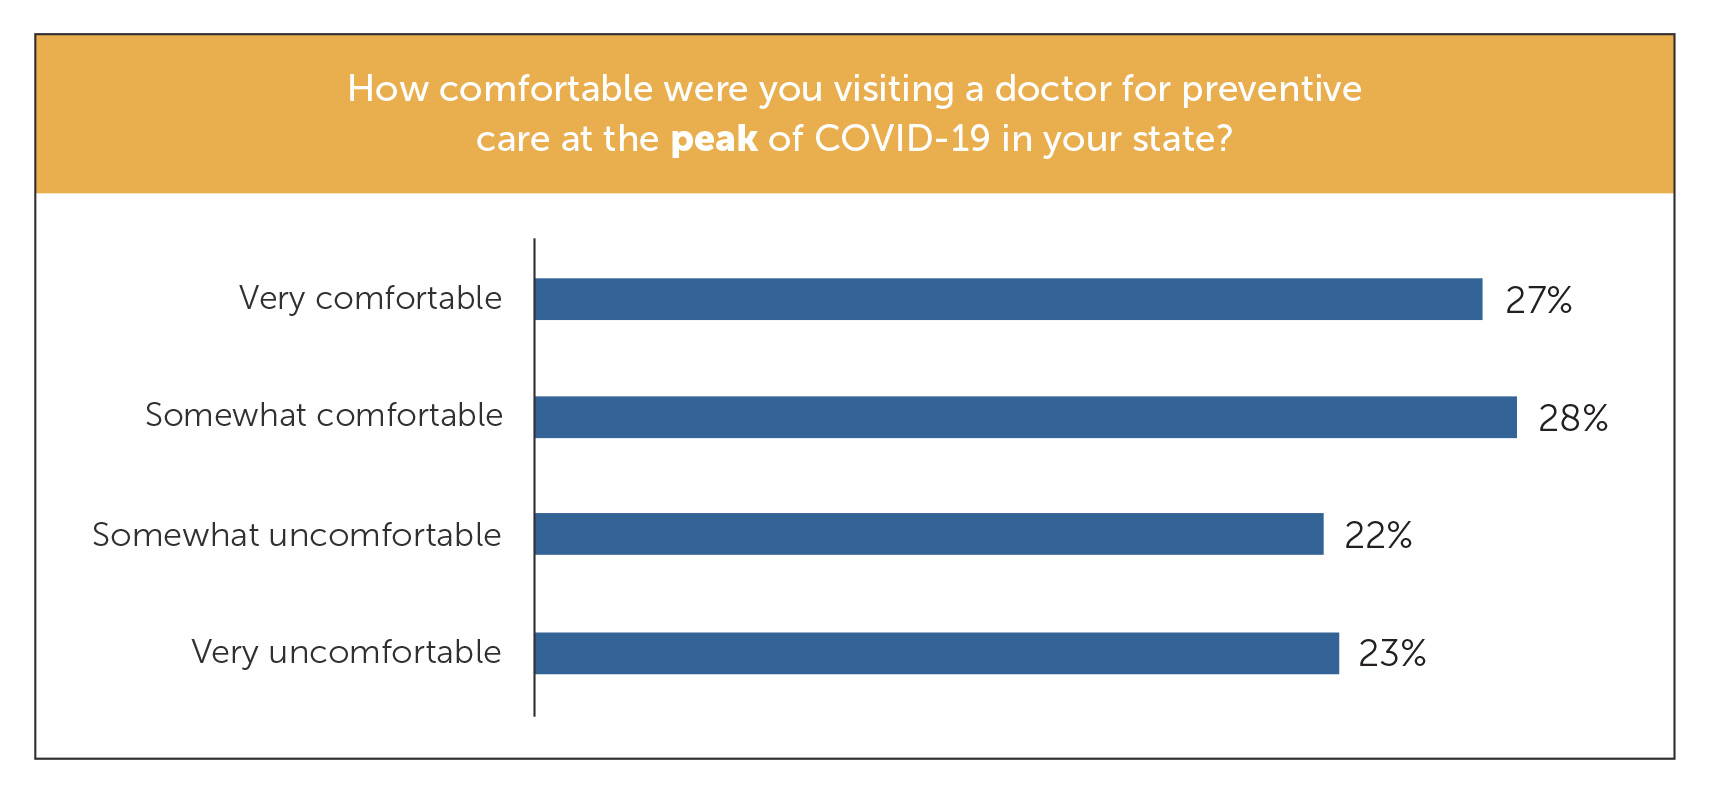 Comfortable visiting doctor at the peak of COVID-19